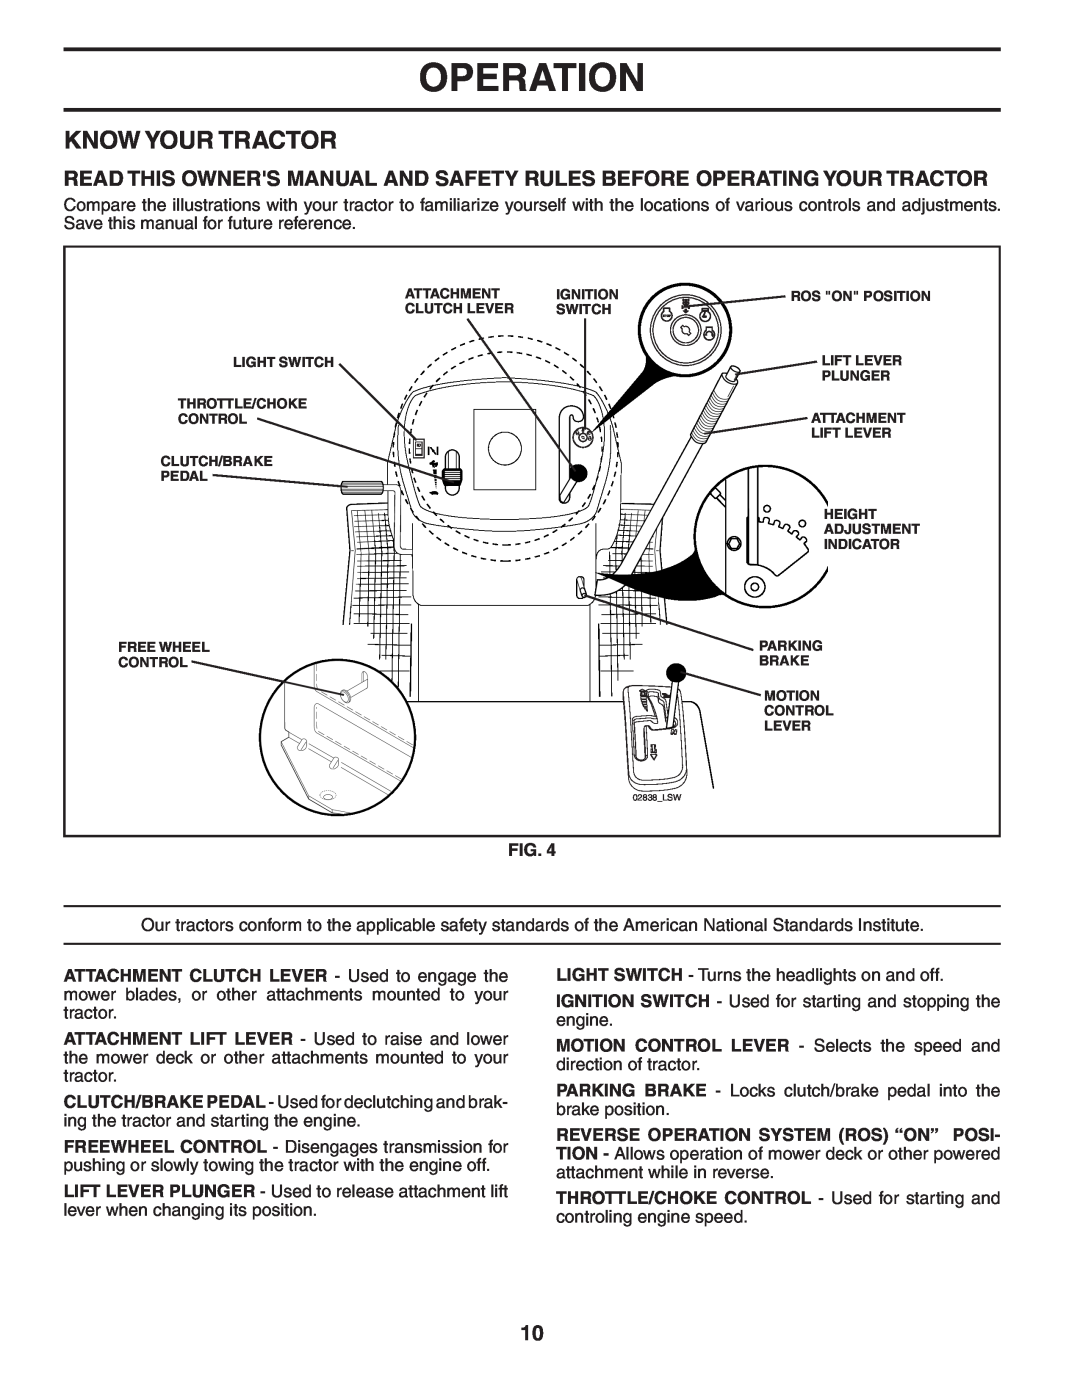 Poulan 405385 manual Know Your Tractor, Operation 